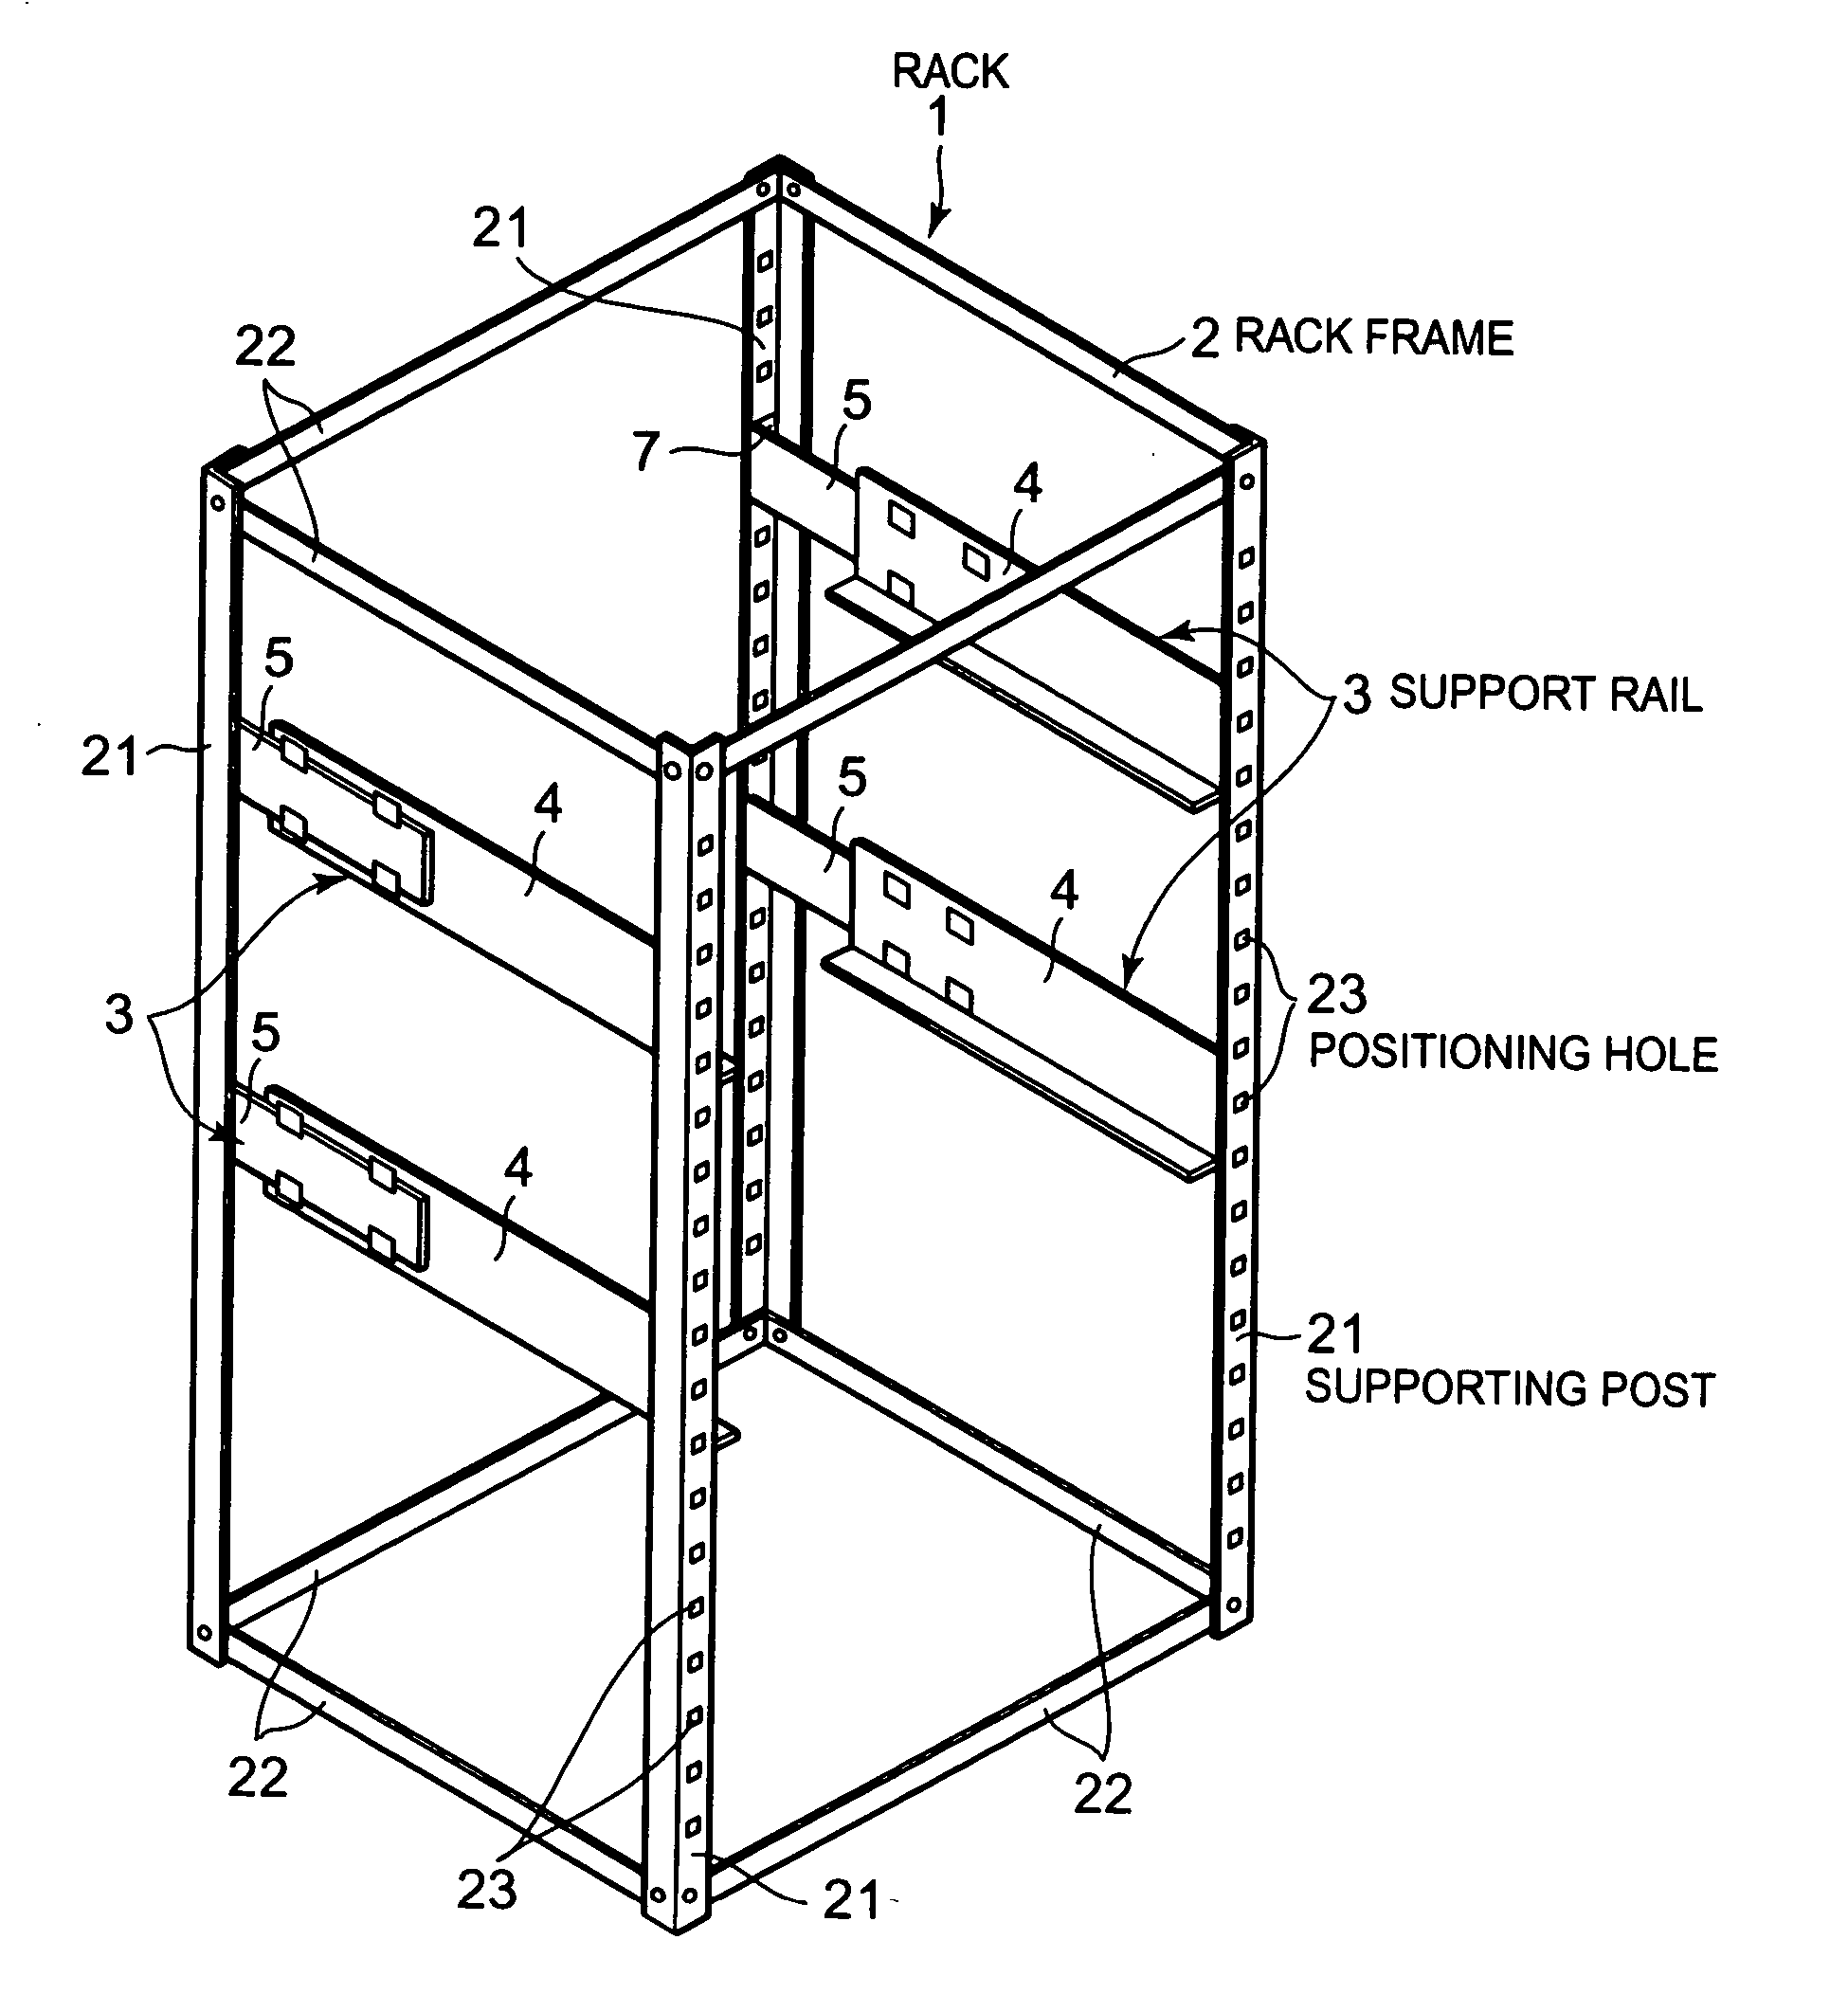 Rack system, adapter, rack frame, support rail, and method of making a rack system